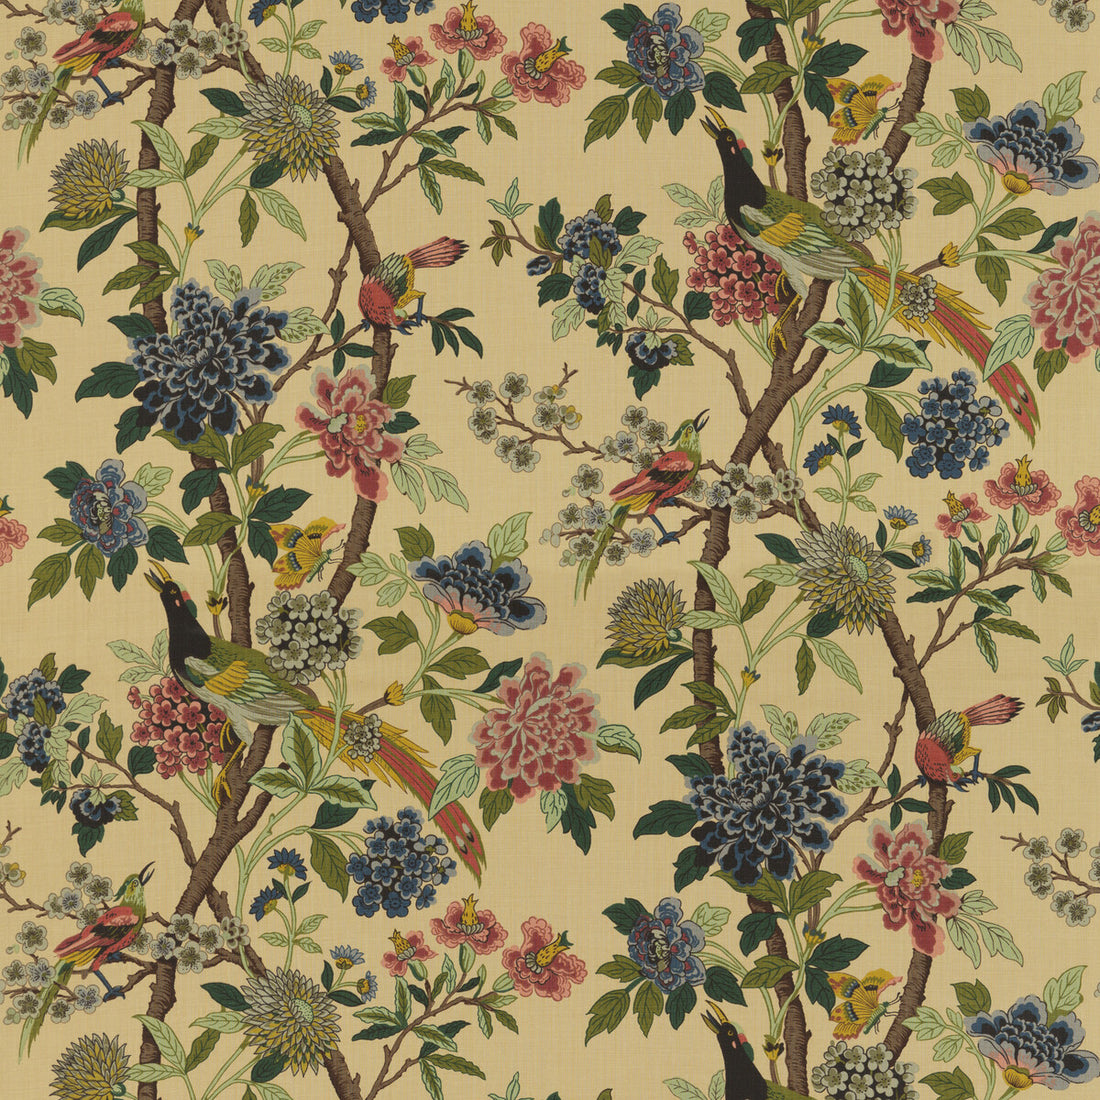 Hydrangea Bird fabric in rose/biscuit color - pattern R1355.3.0 - by G P &amp; J Baker in the East To West collection